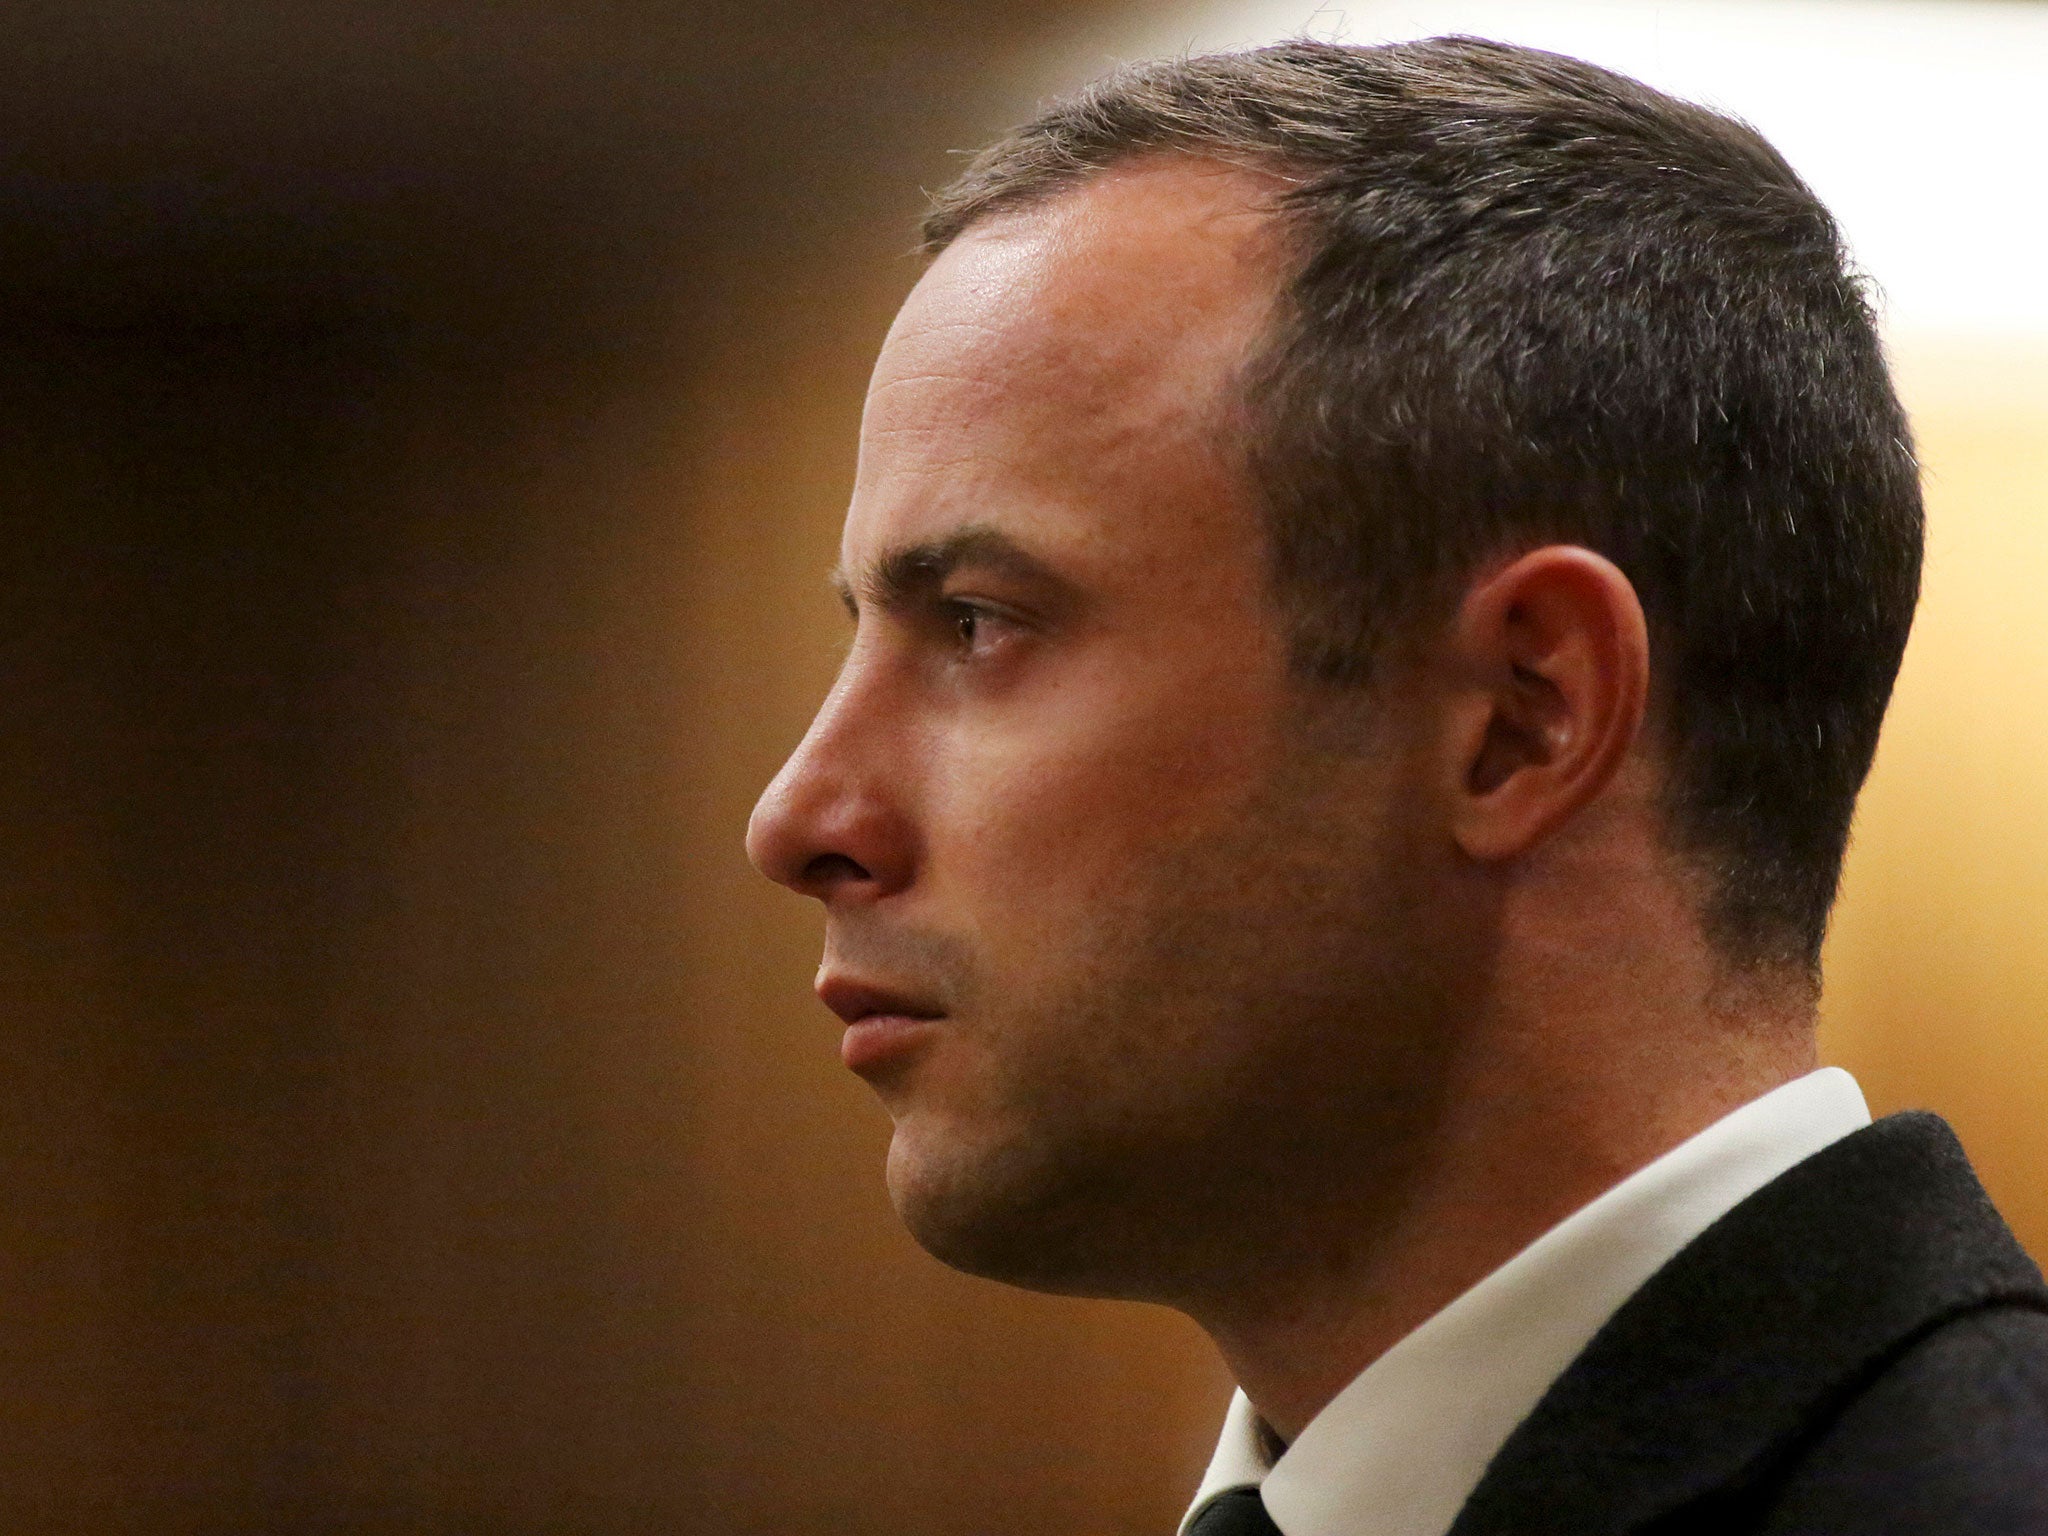 The murder trial of Oscar Pistorius will resume after a month of mental health evaluations of the athlete